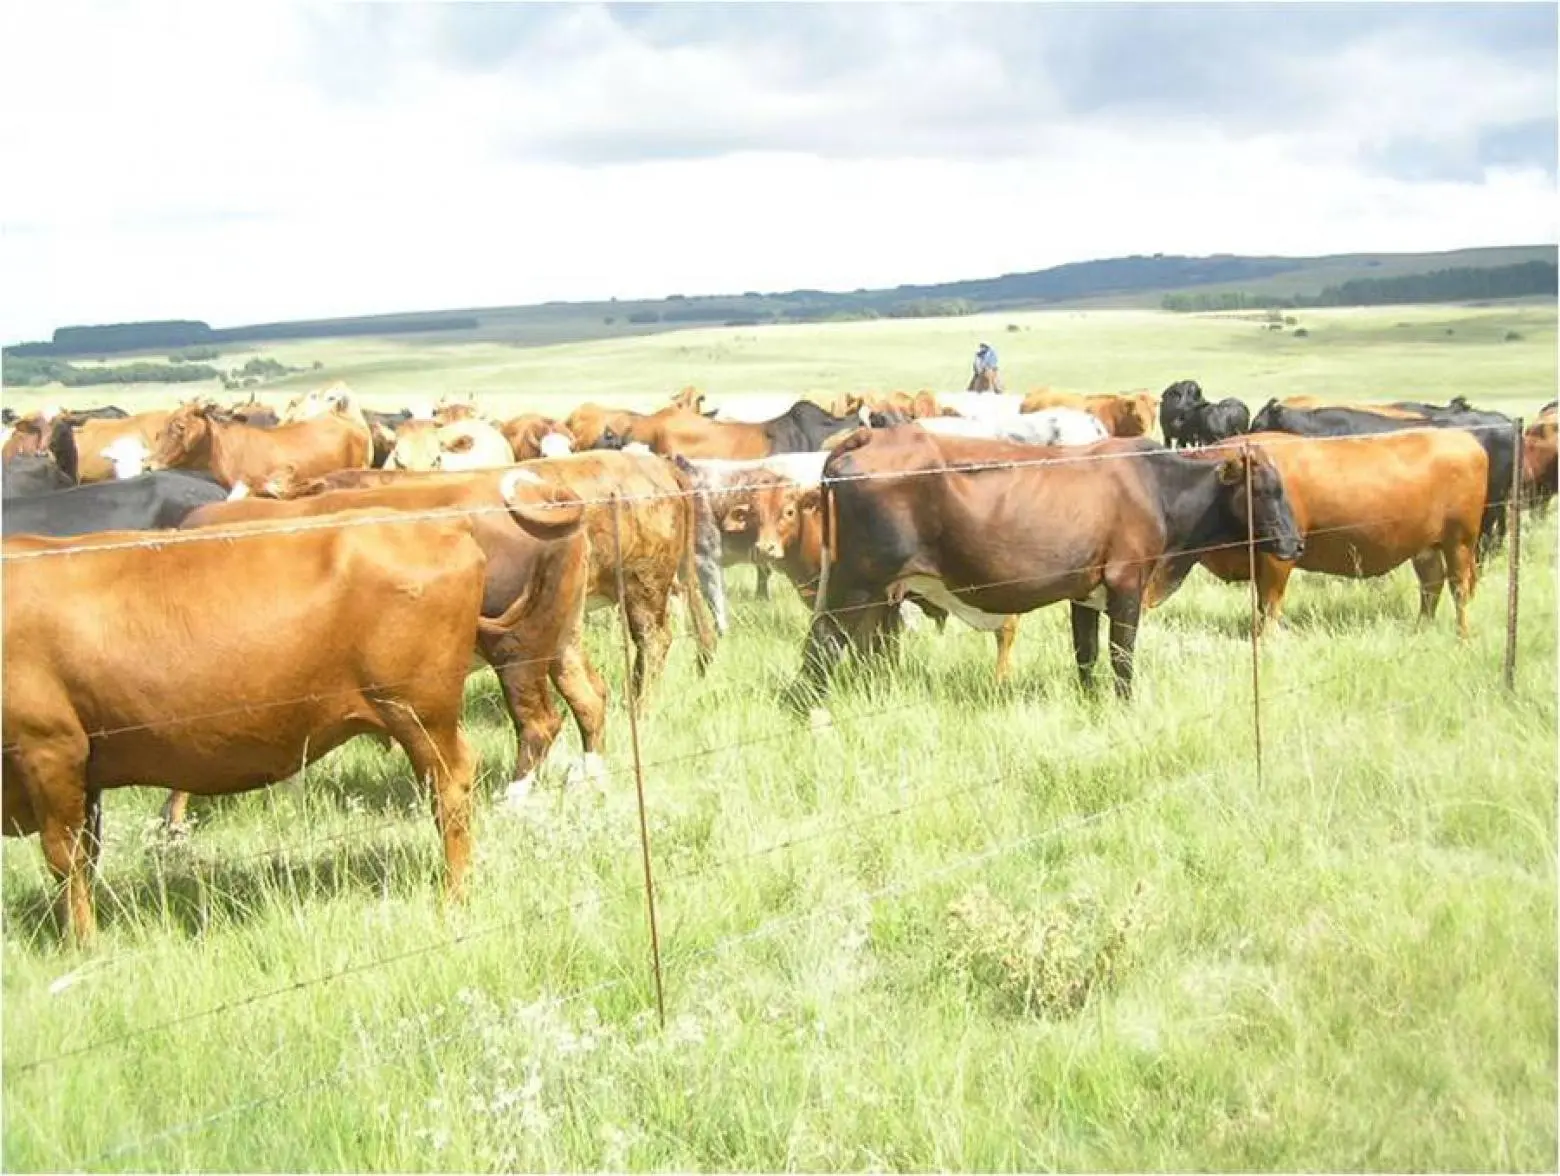 Cattle farming allowing to create opportunities for socio-economic growth at a household level